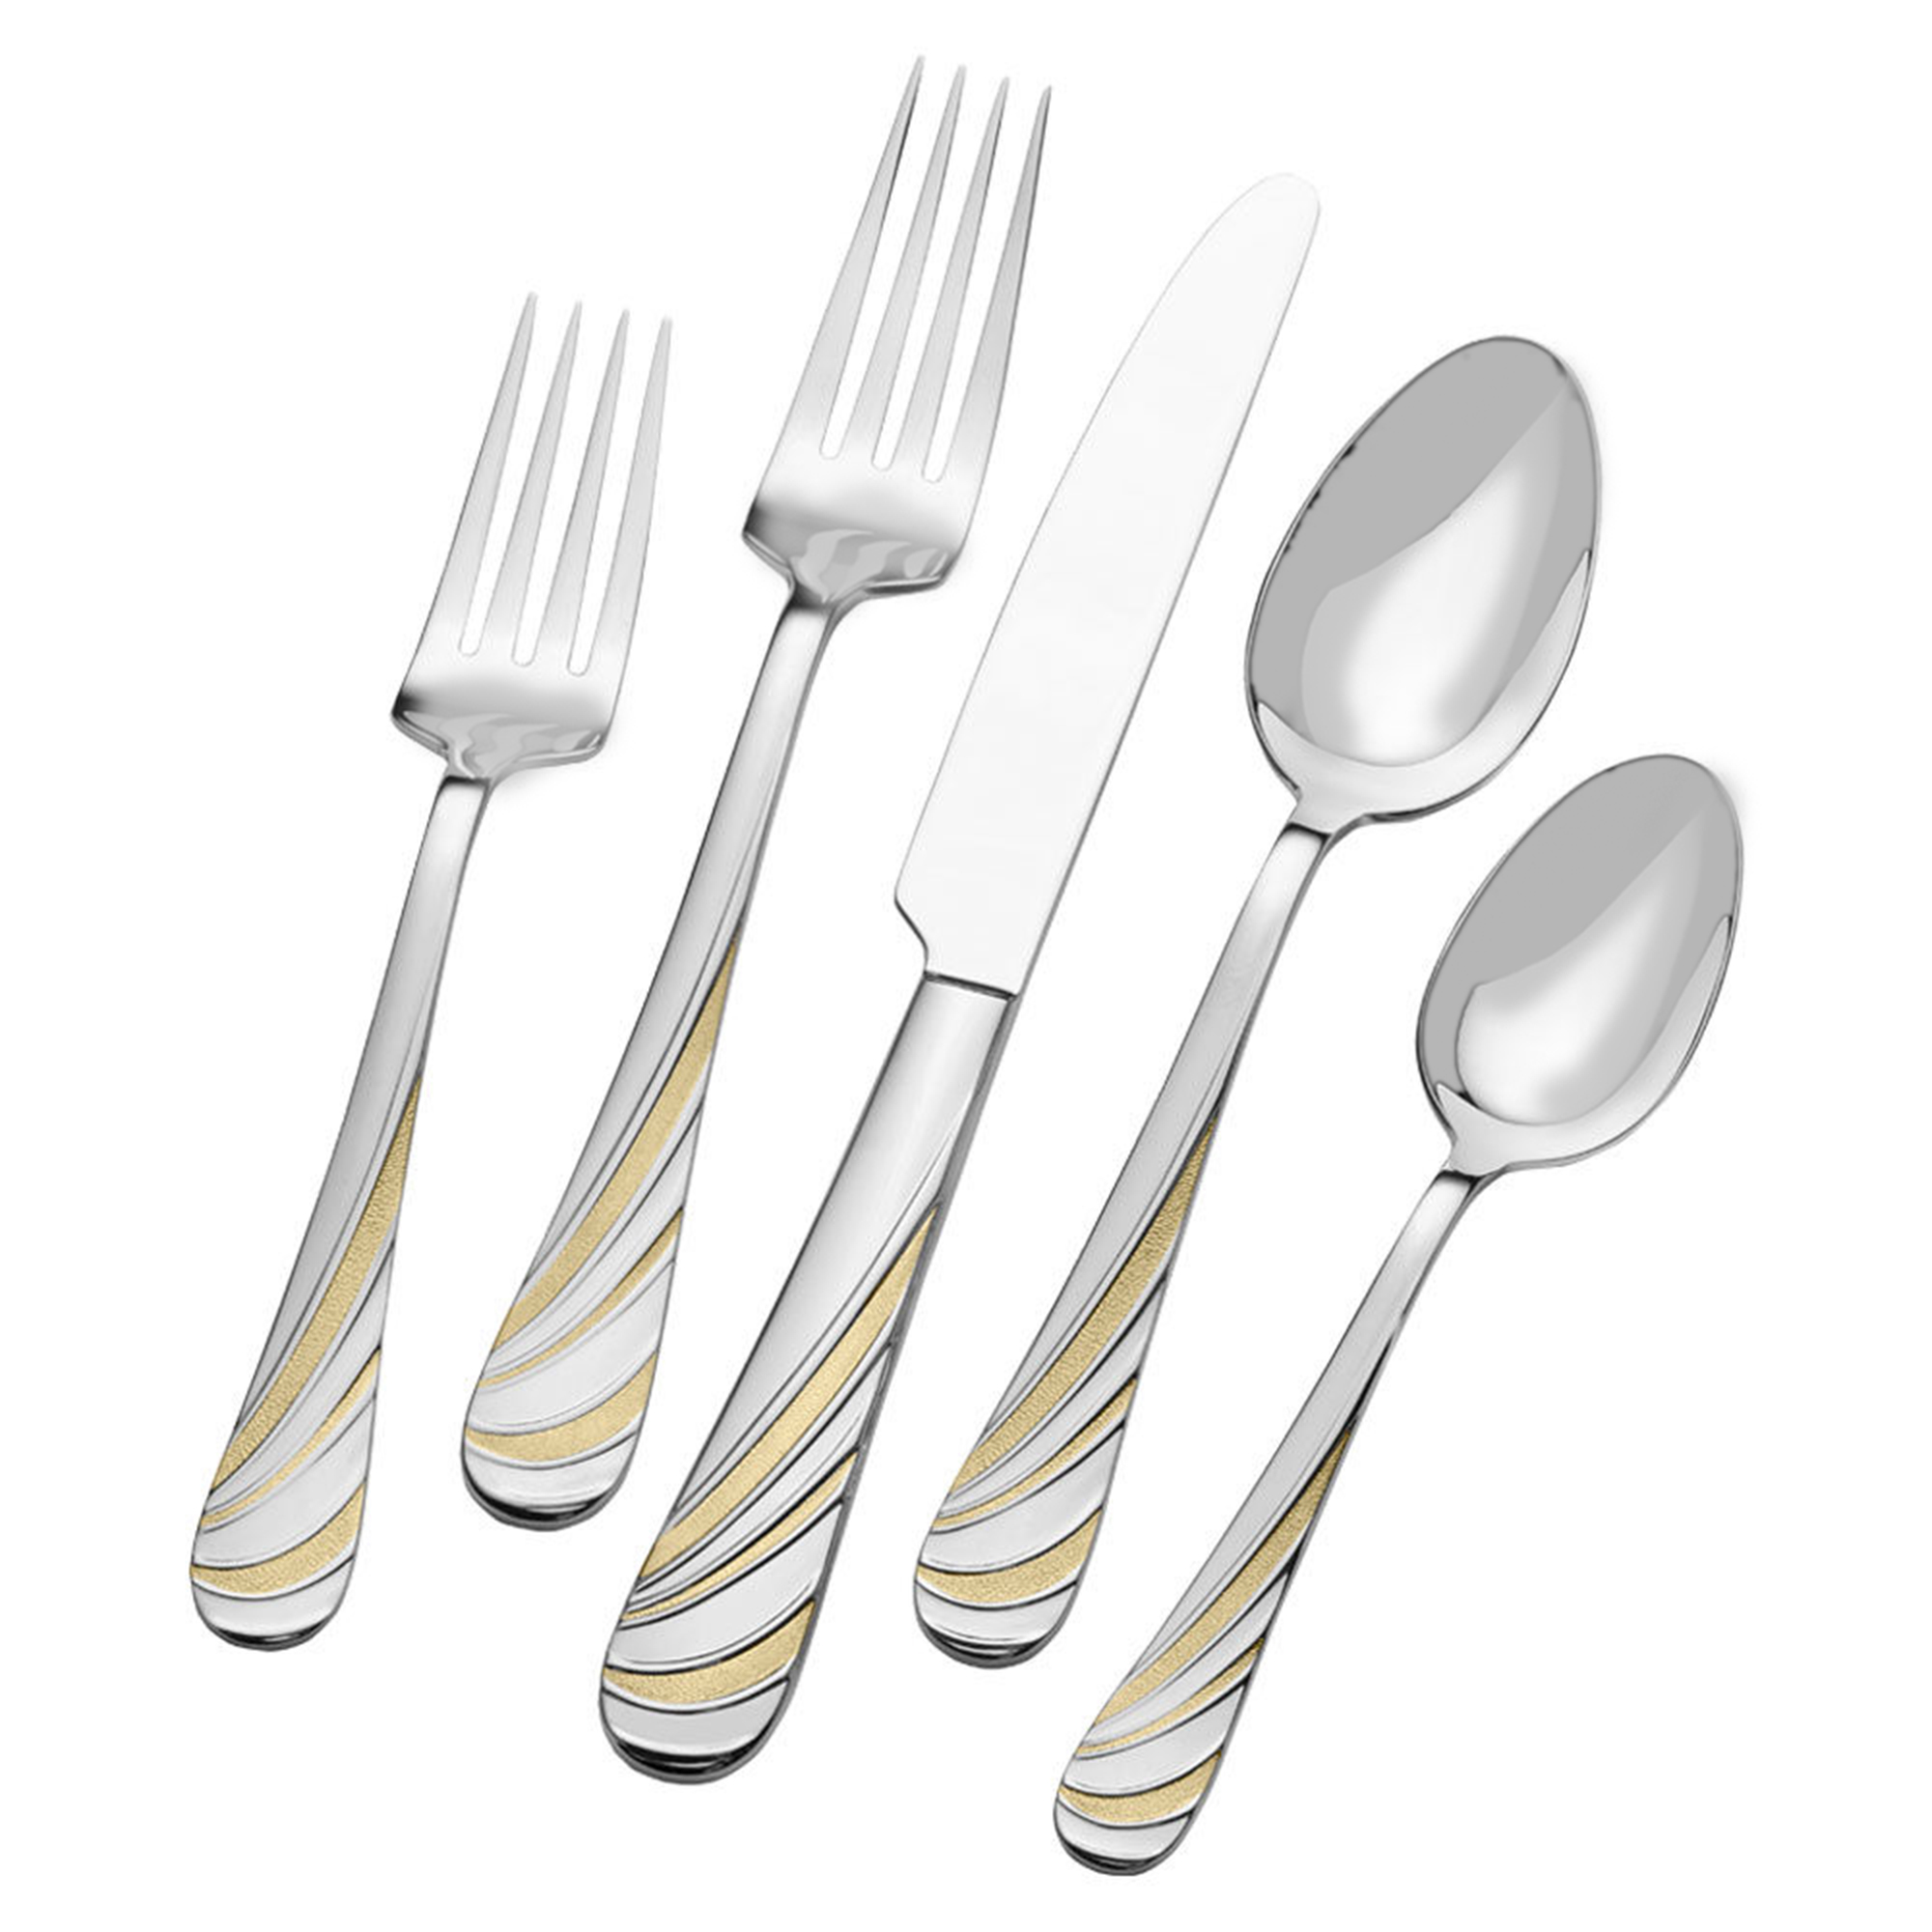 Mikasa "Swirl" 20-pc. Service for 4 18/10 Stainless Steel Flatware Set with  Gold-Plated Accents | Ross-Simons